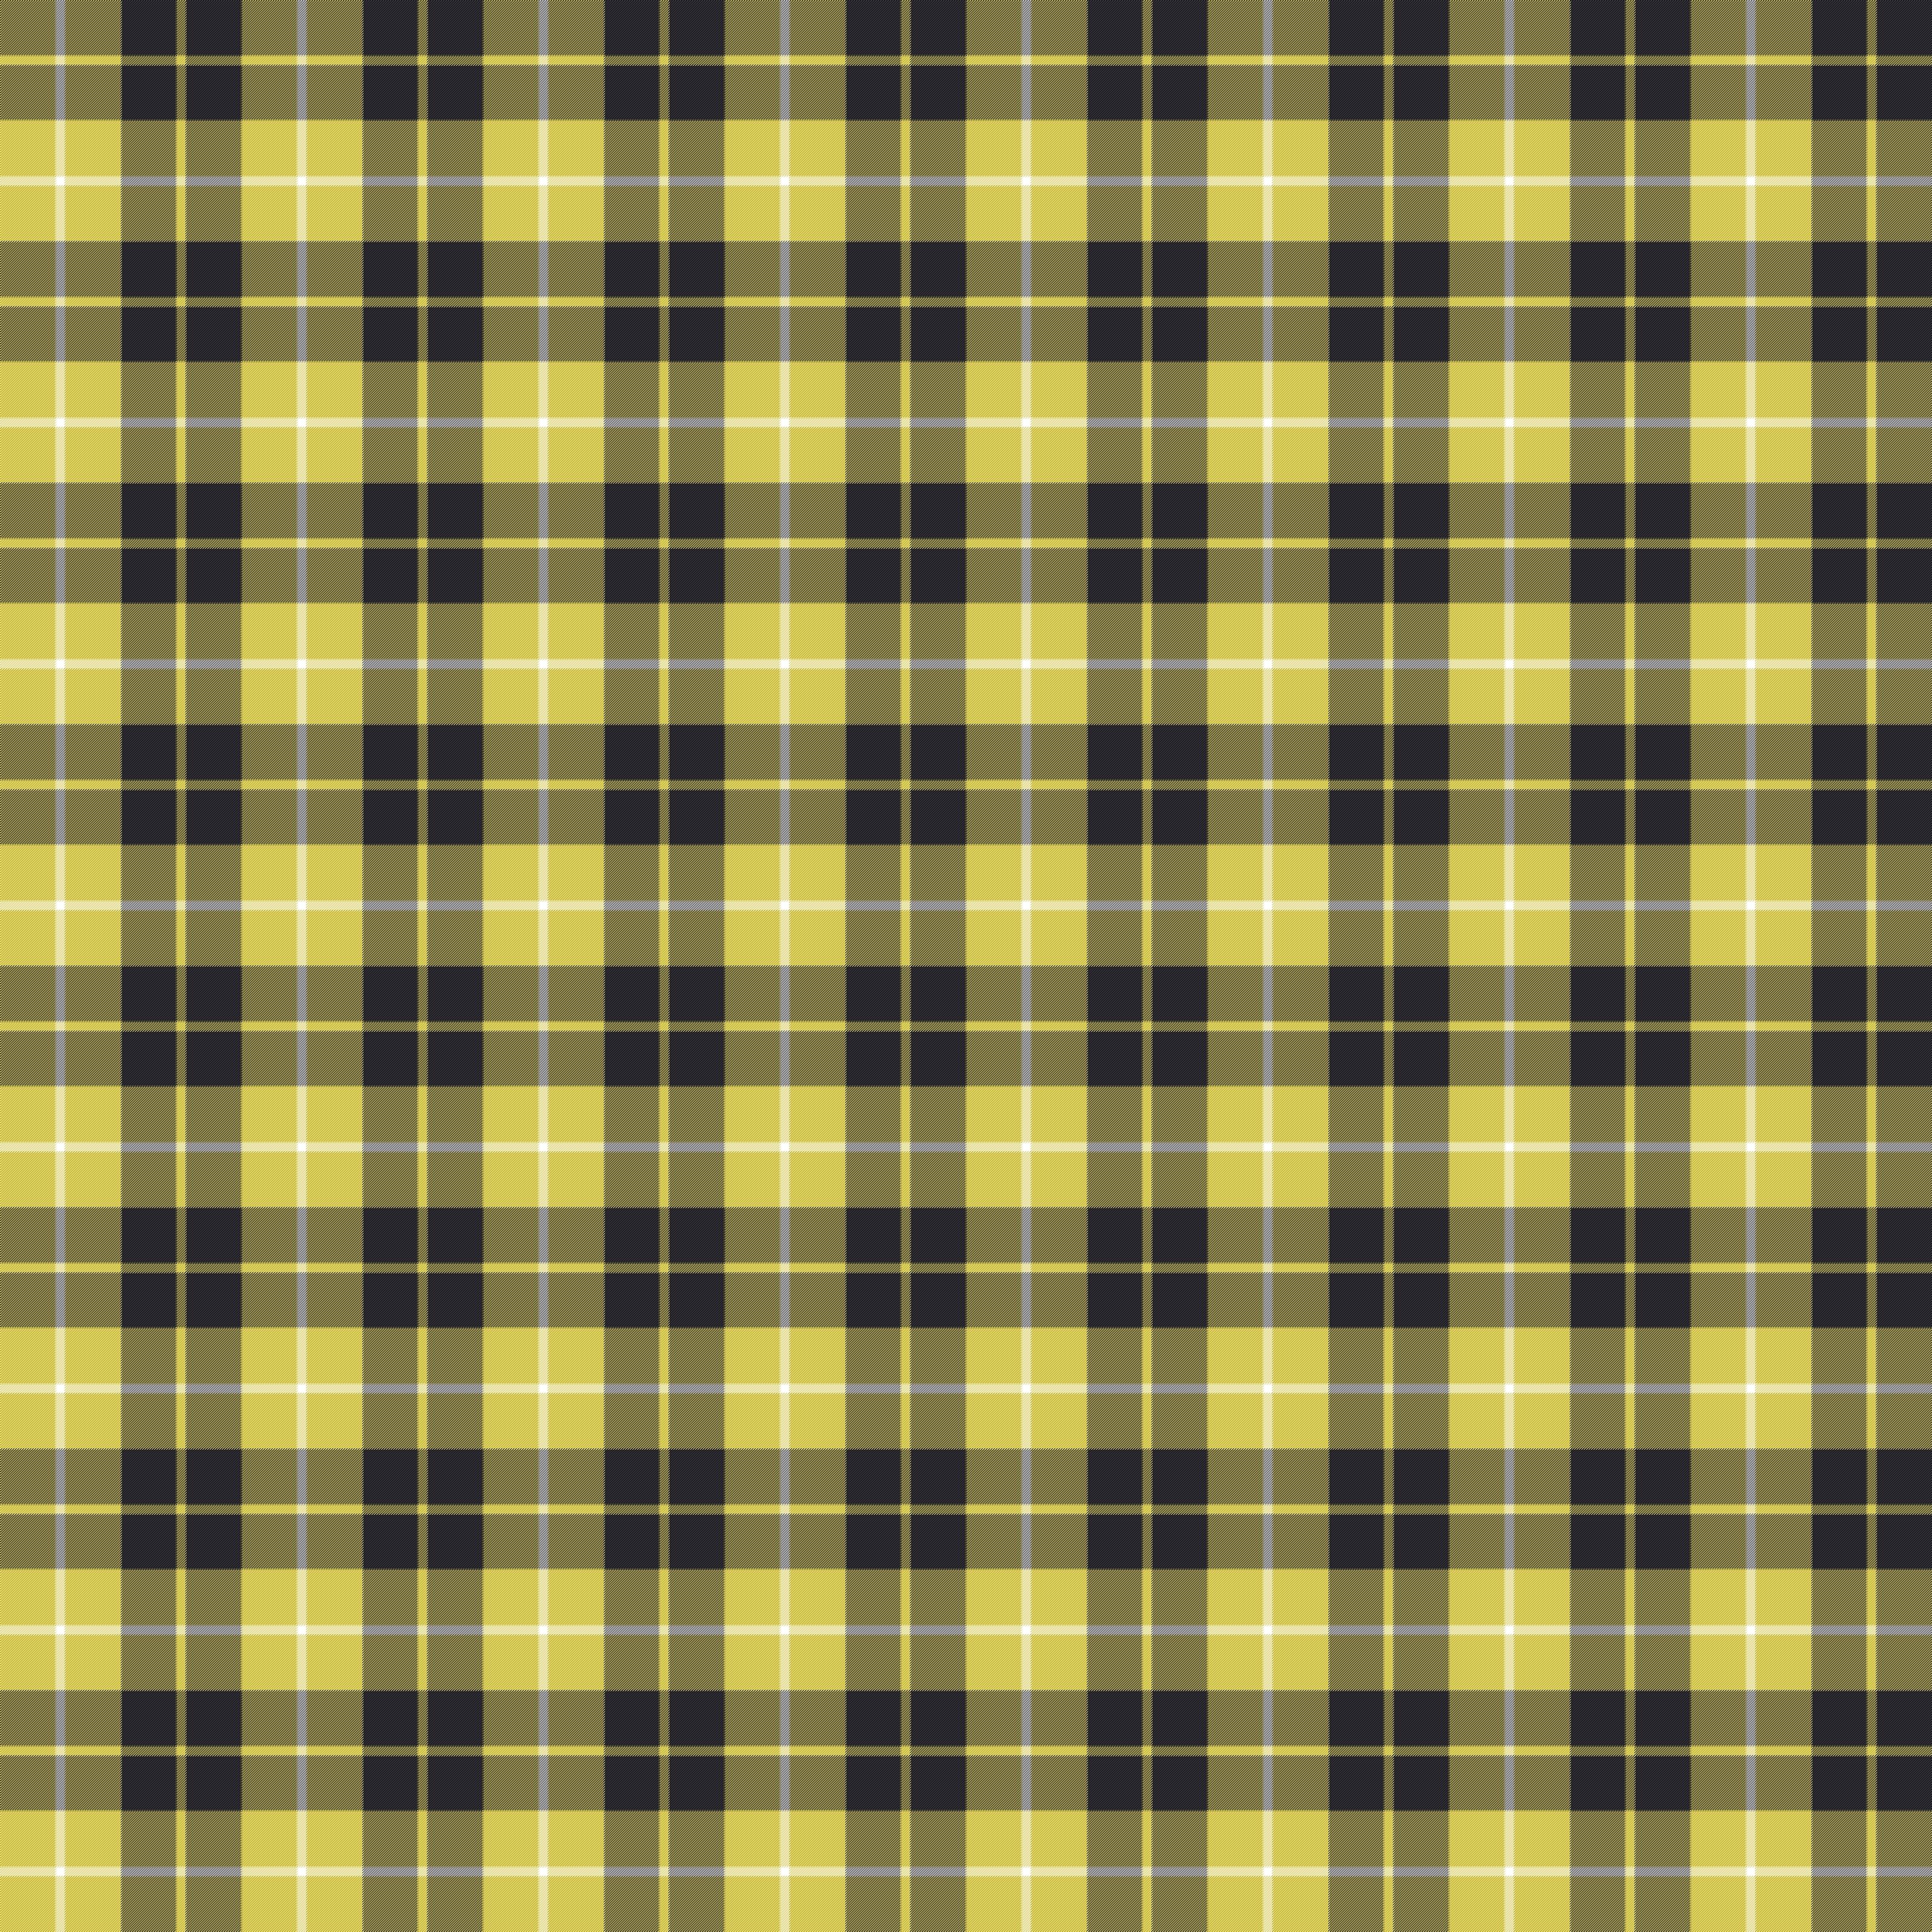 Cher Horowitz’s now infamous yellow plaid is throught to relate to the tartan of the Barclay clan.